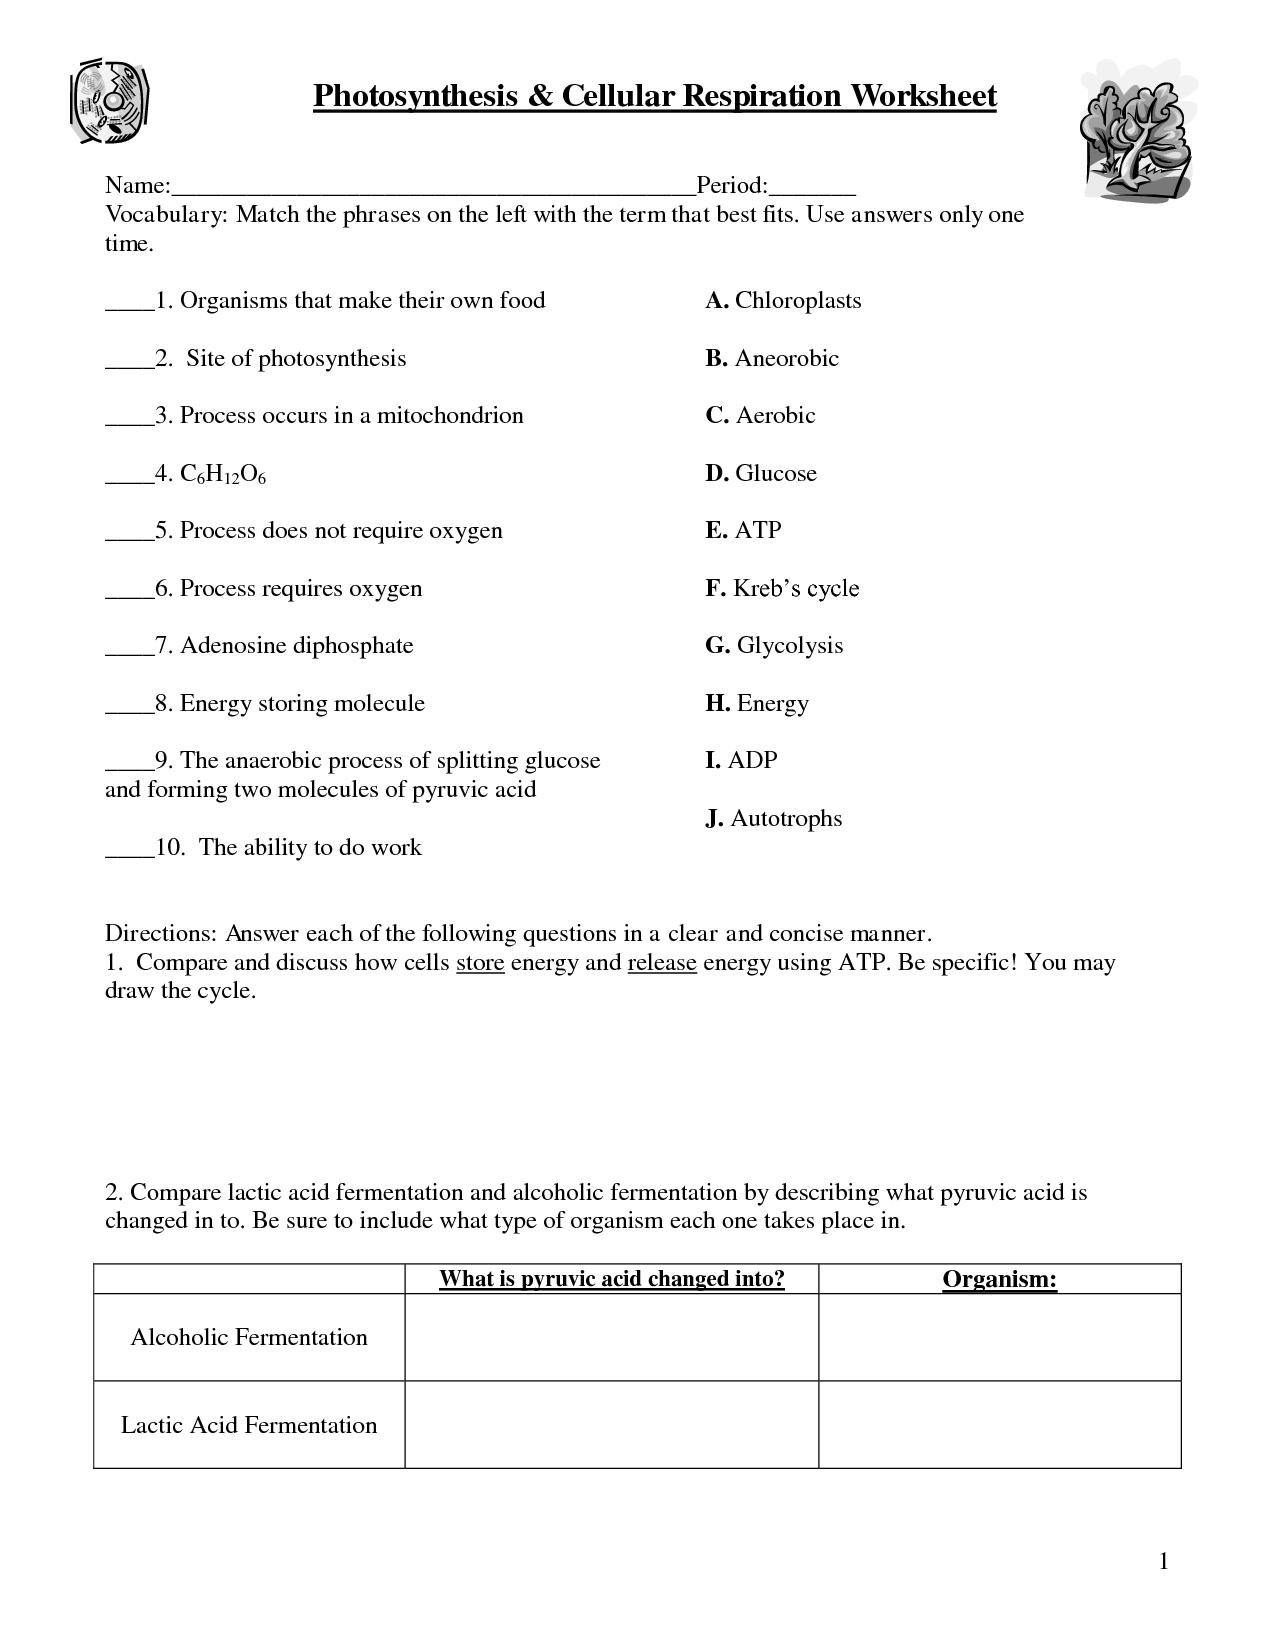 14-best-images-of-photosynthesis-worksheets-with-answer-key-photosynthesis-cellular